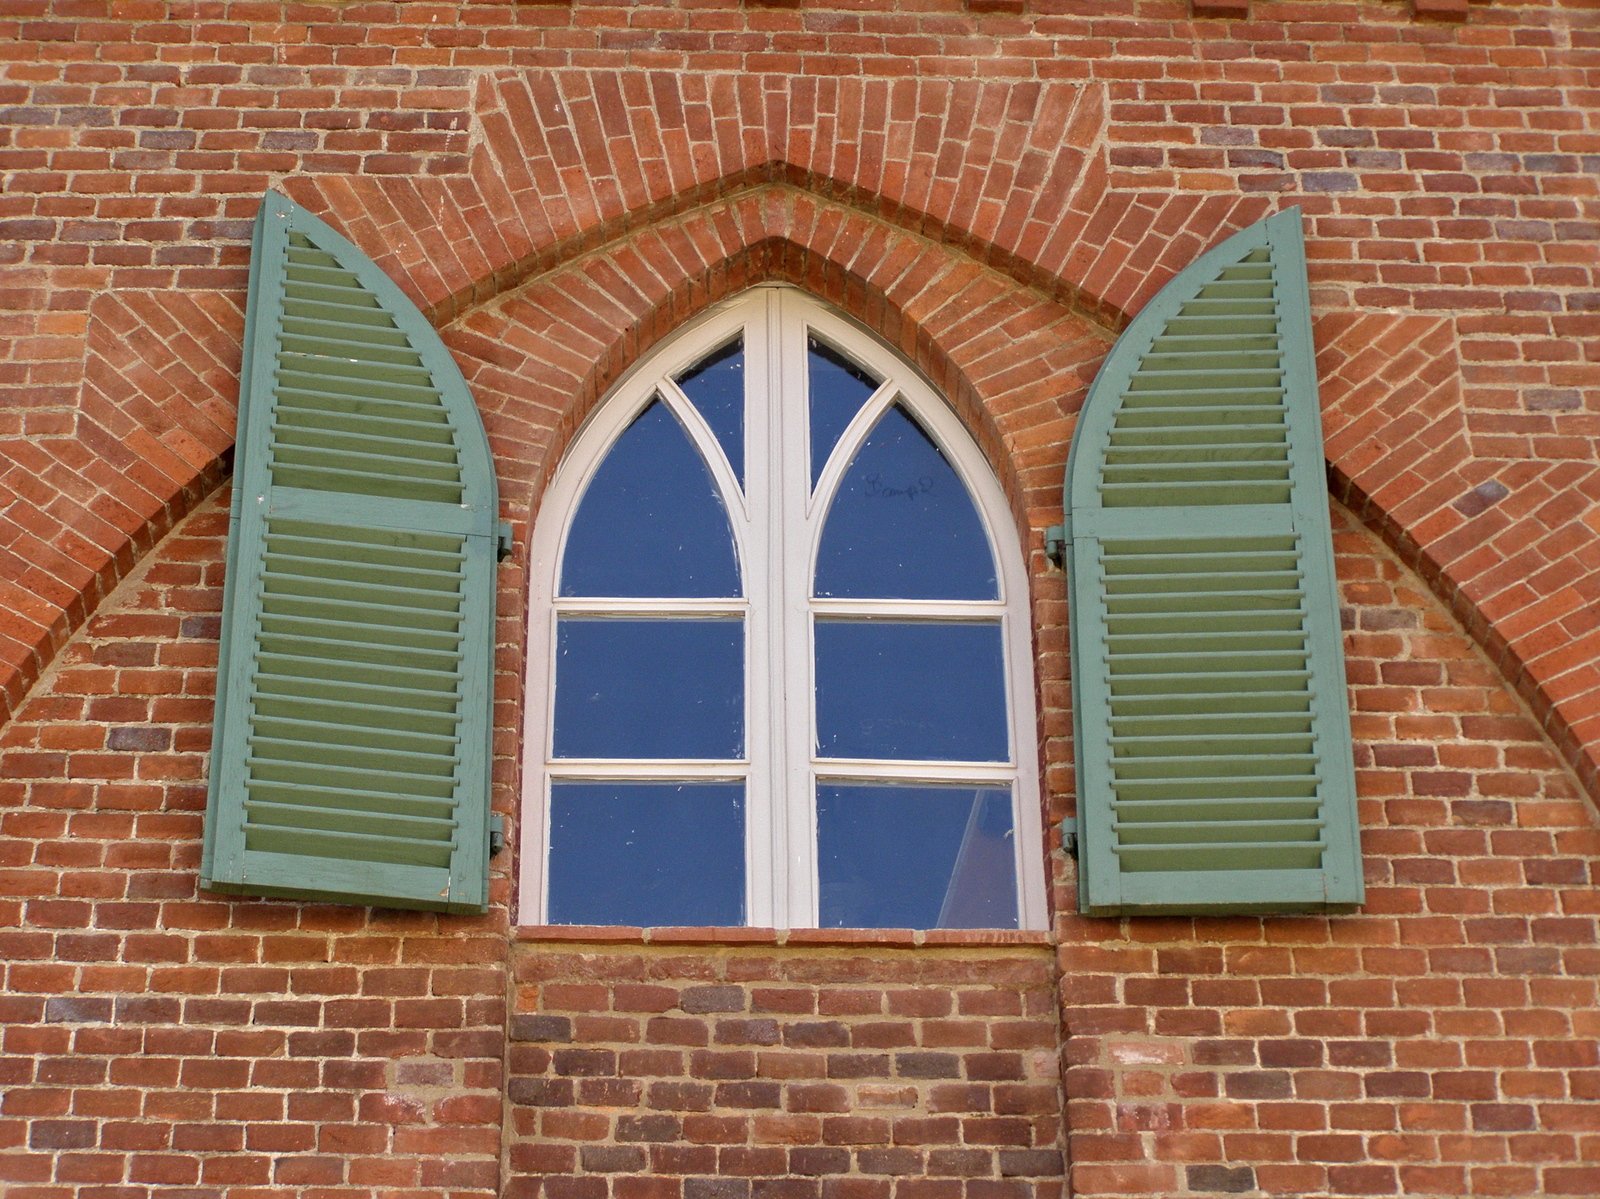 a view of windows on the outside of a brick building